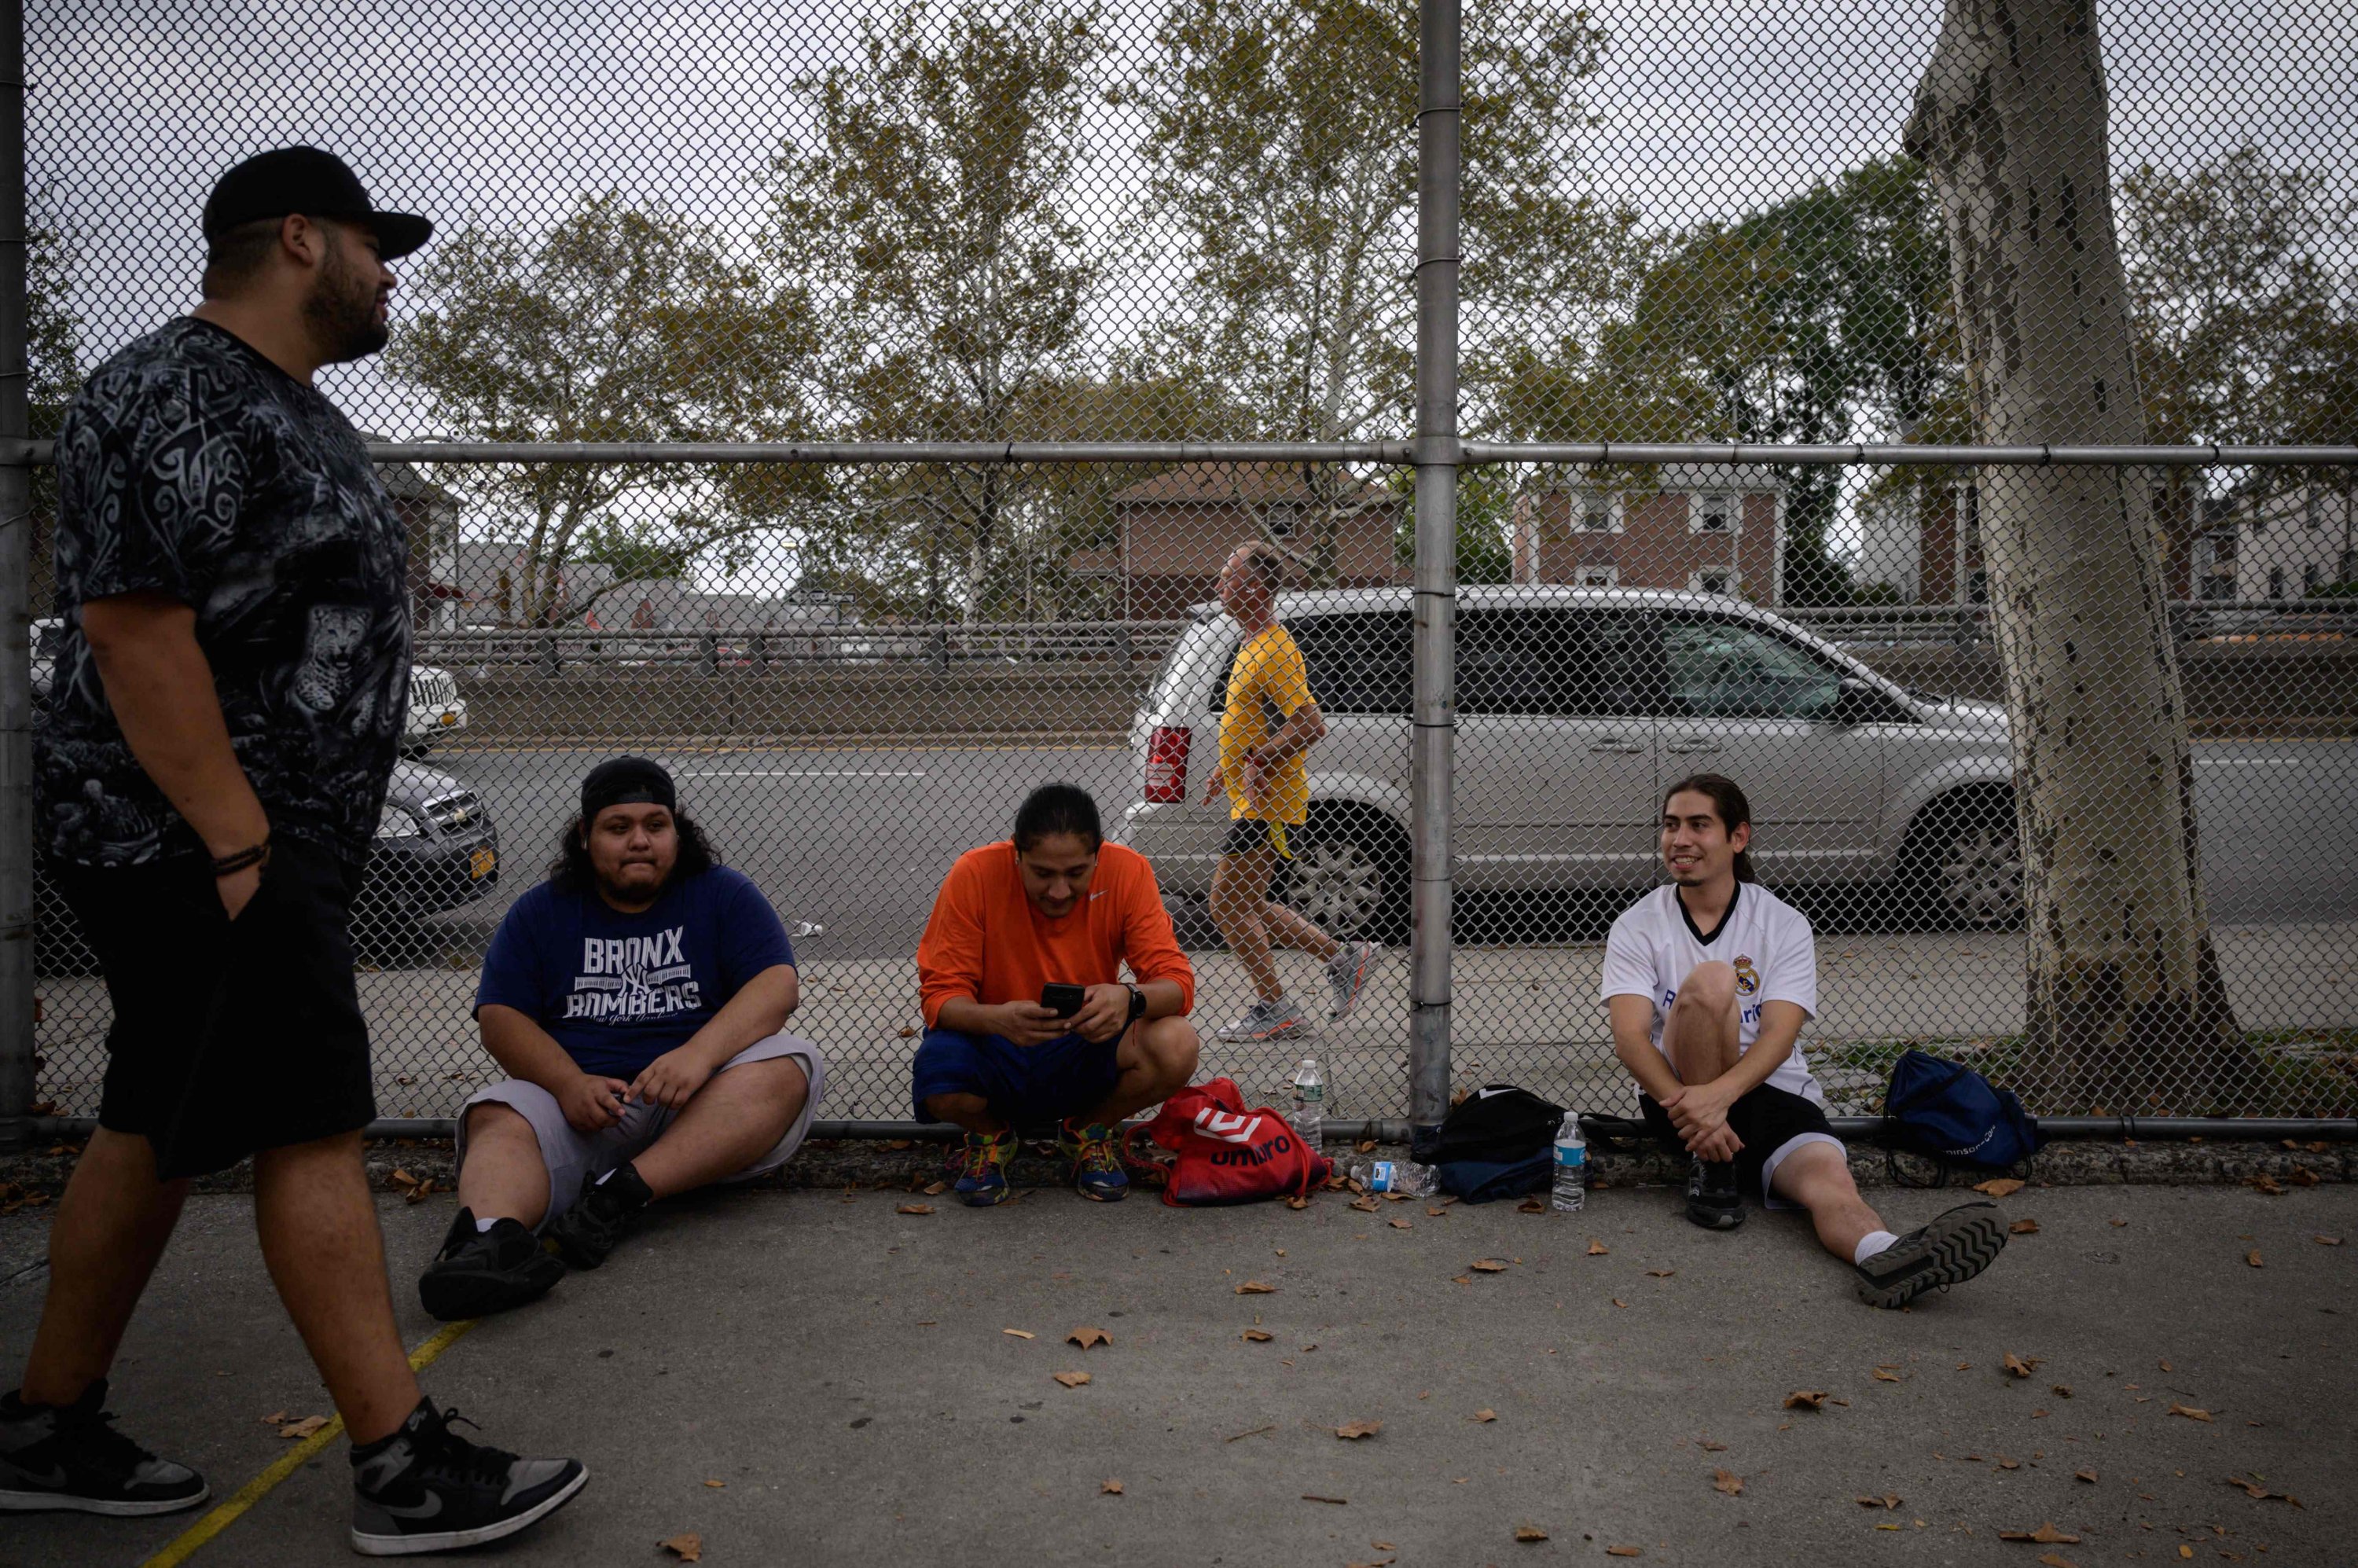 A group of men pause between games on a handball court as Stutisheel Lebedyev (C) of Ukraine competes in the 'Self-Transcendence 3100 Mile Race,' the world's longest certified foot race in Queens, New York, U.S., Oct. 17, 2021. (AFP Photo)